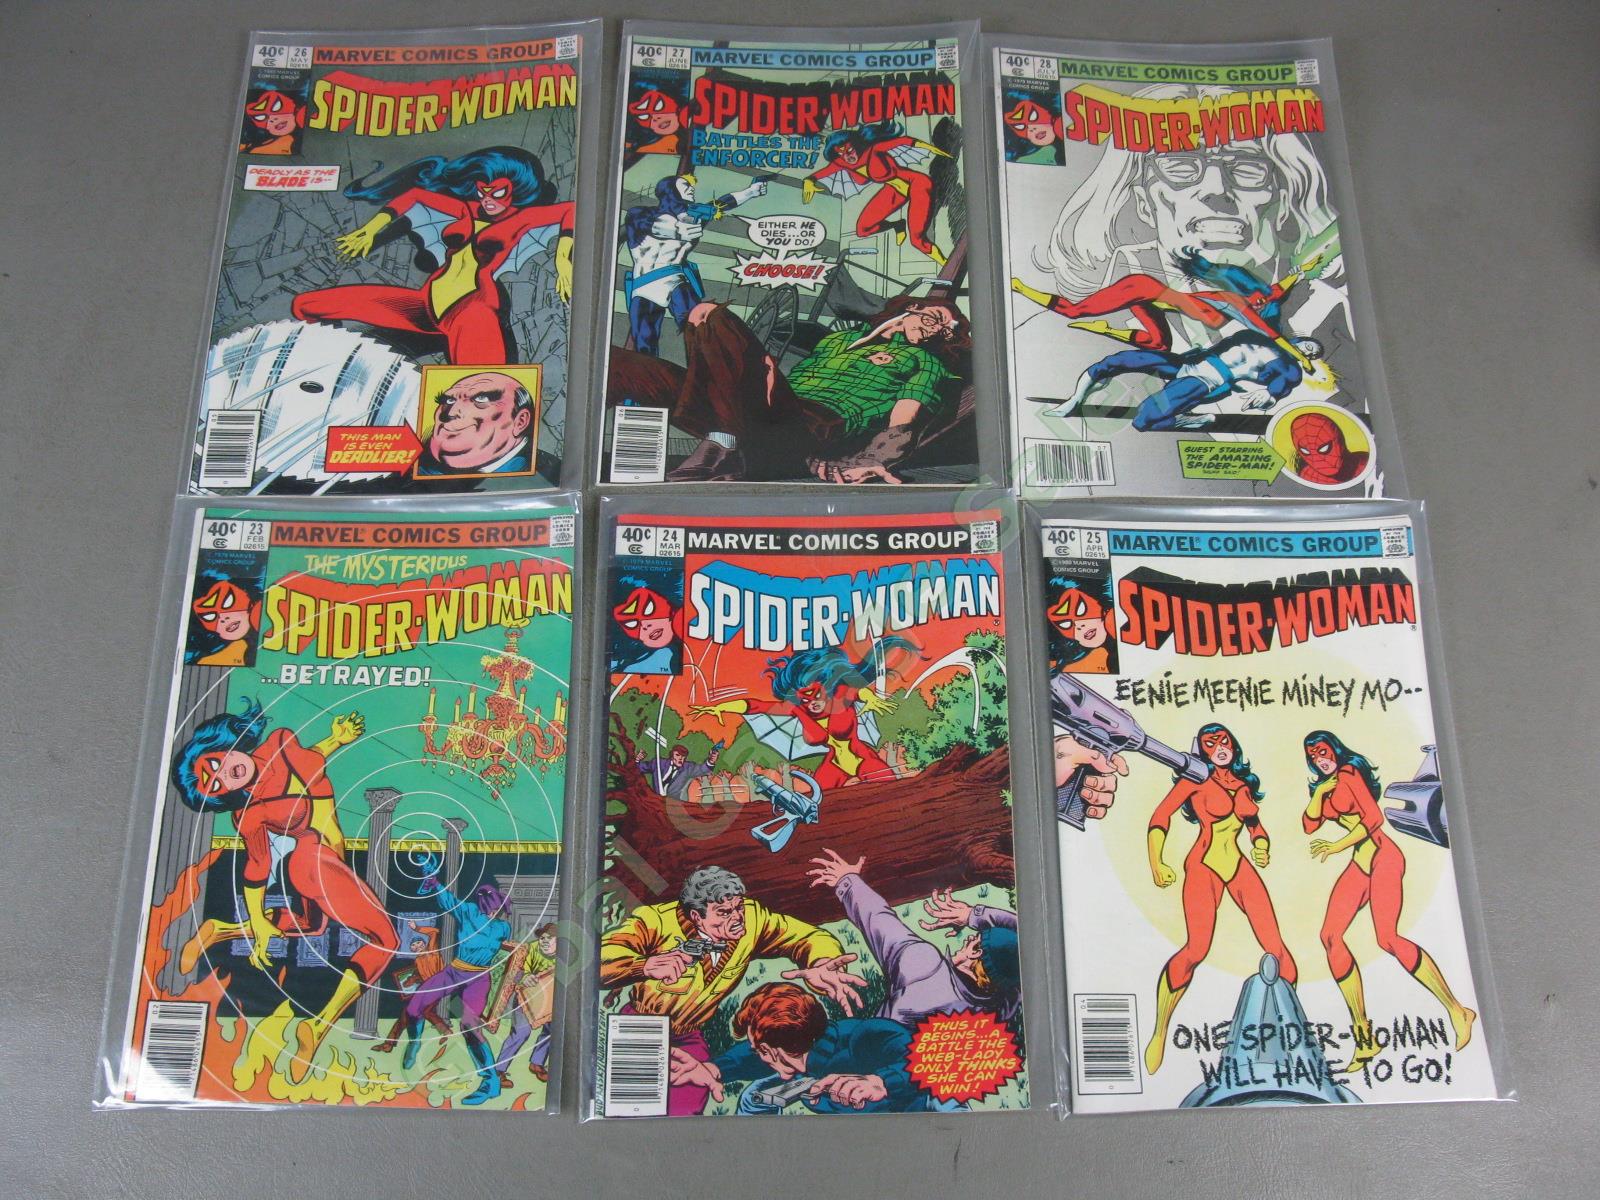 48 Vtg Marvel Spider-Woman Comic Book Collection Lot Runs 1-8 10-36 38-40 42-50 10